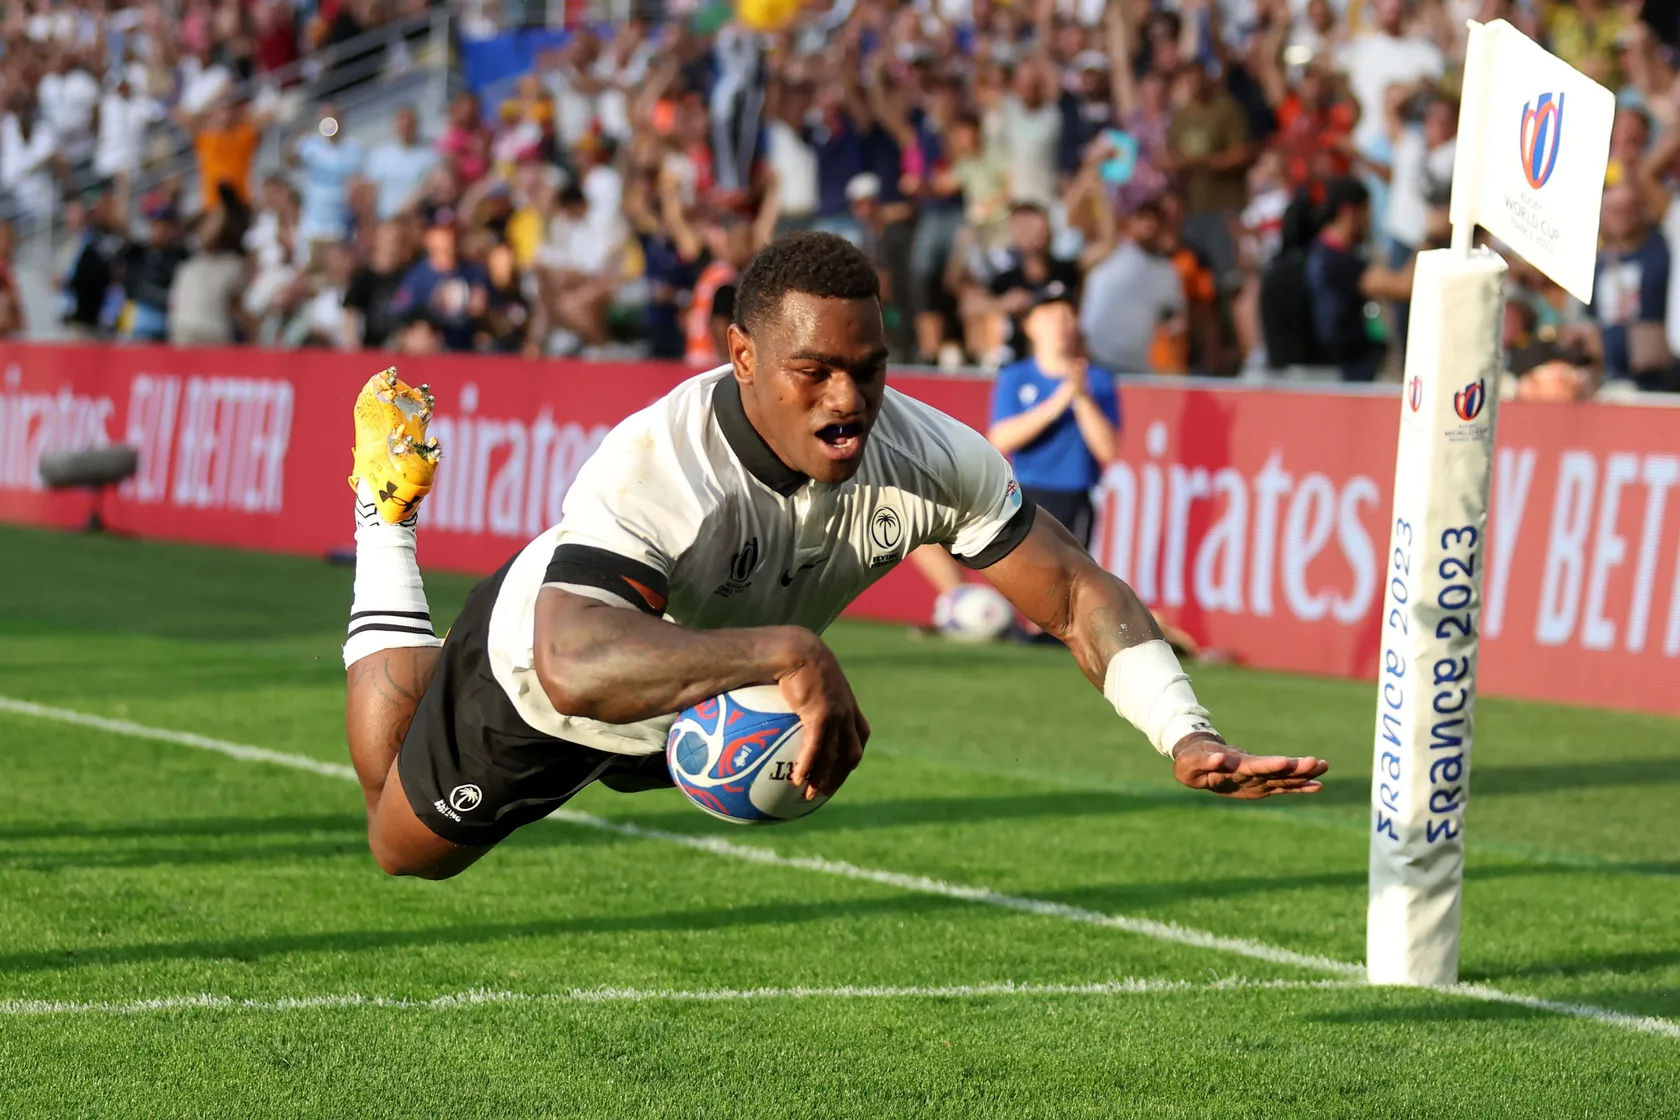 Fiji’s Milestone Victory Over Australia in Rugby World Cup